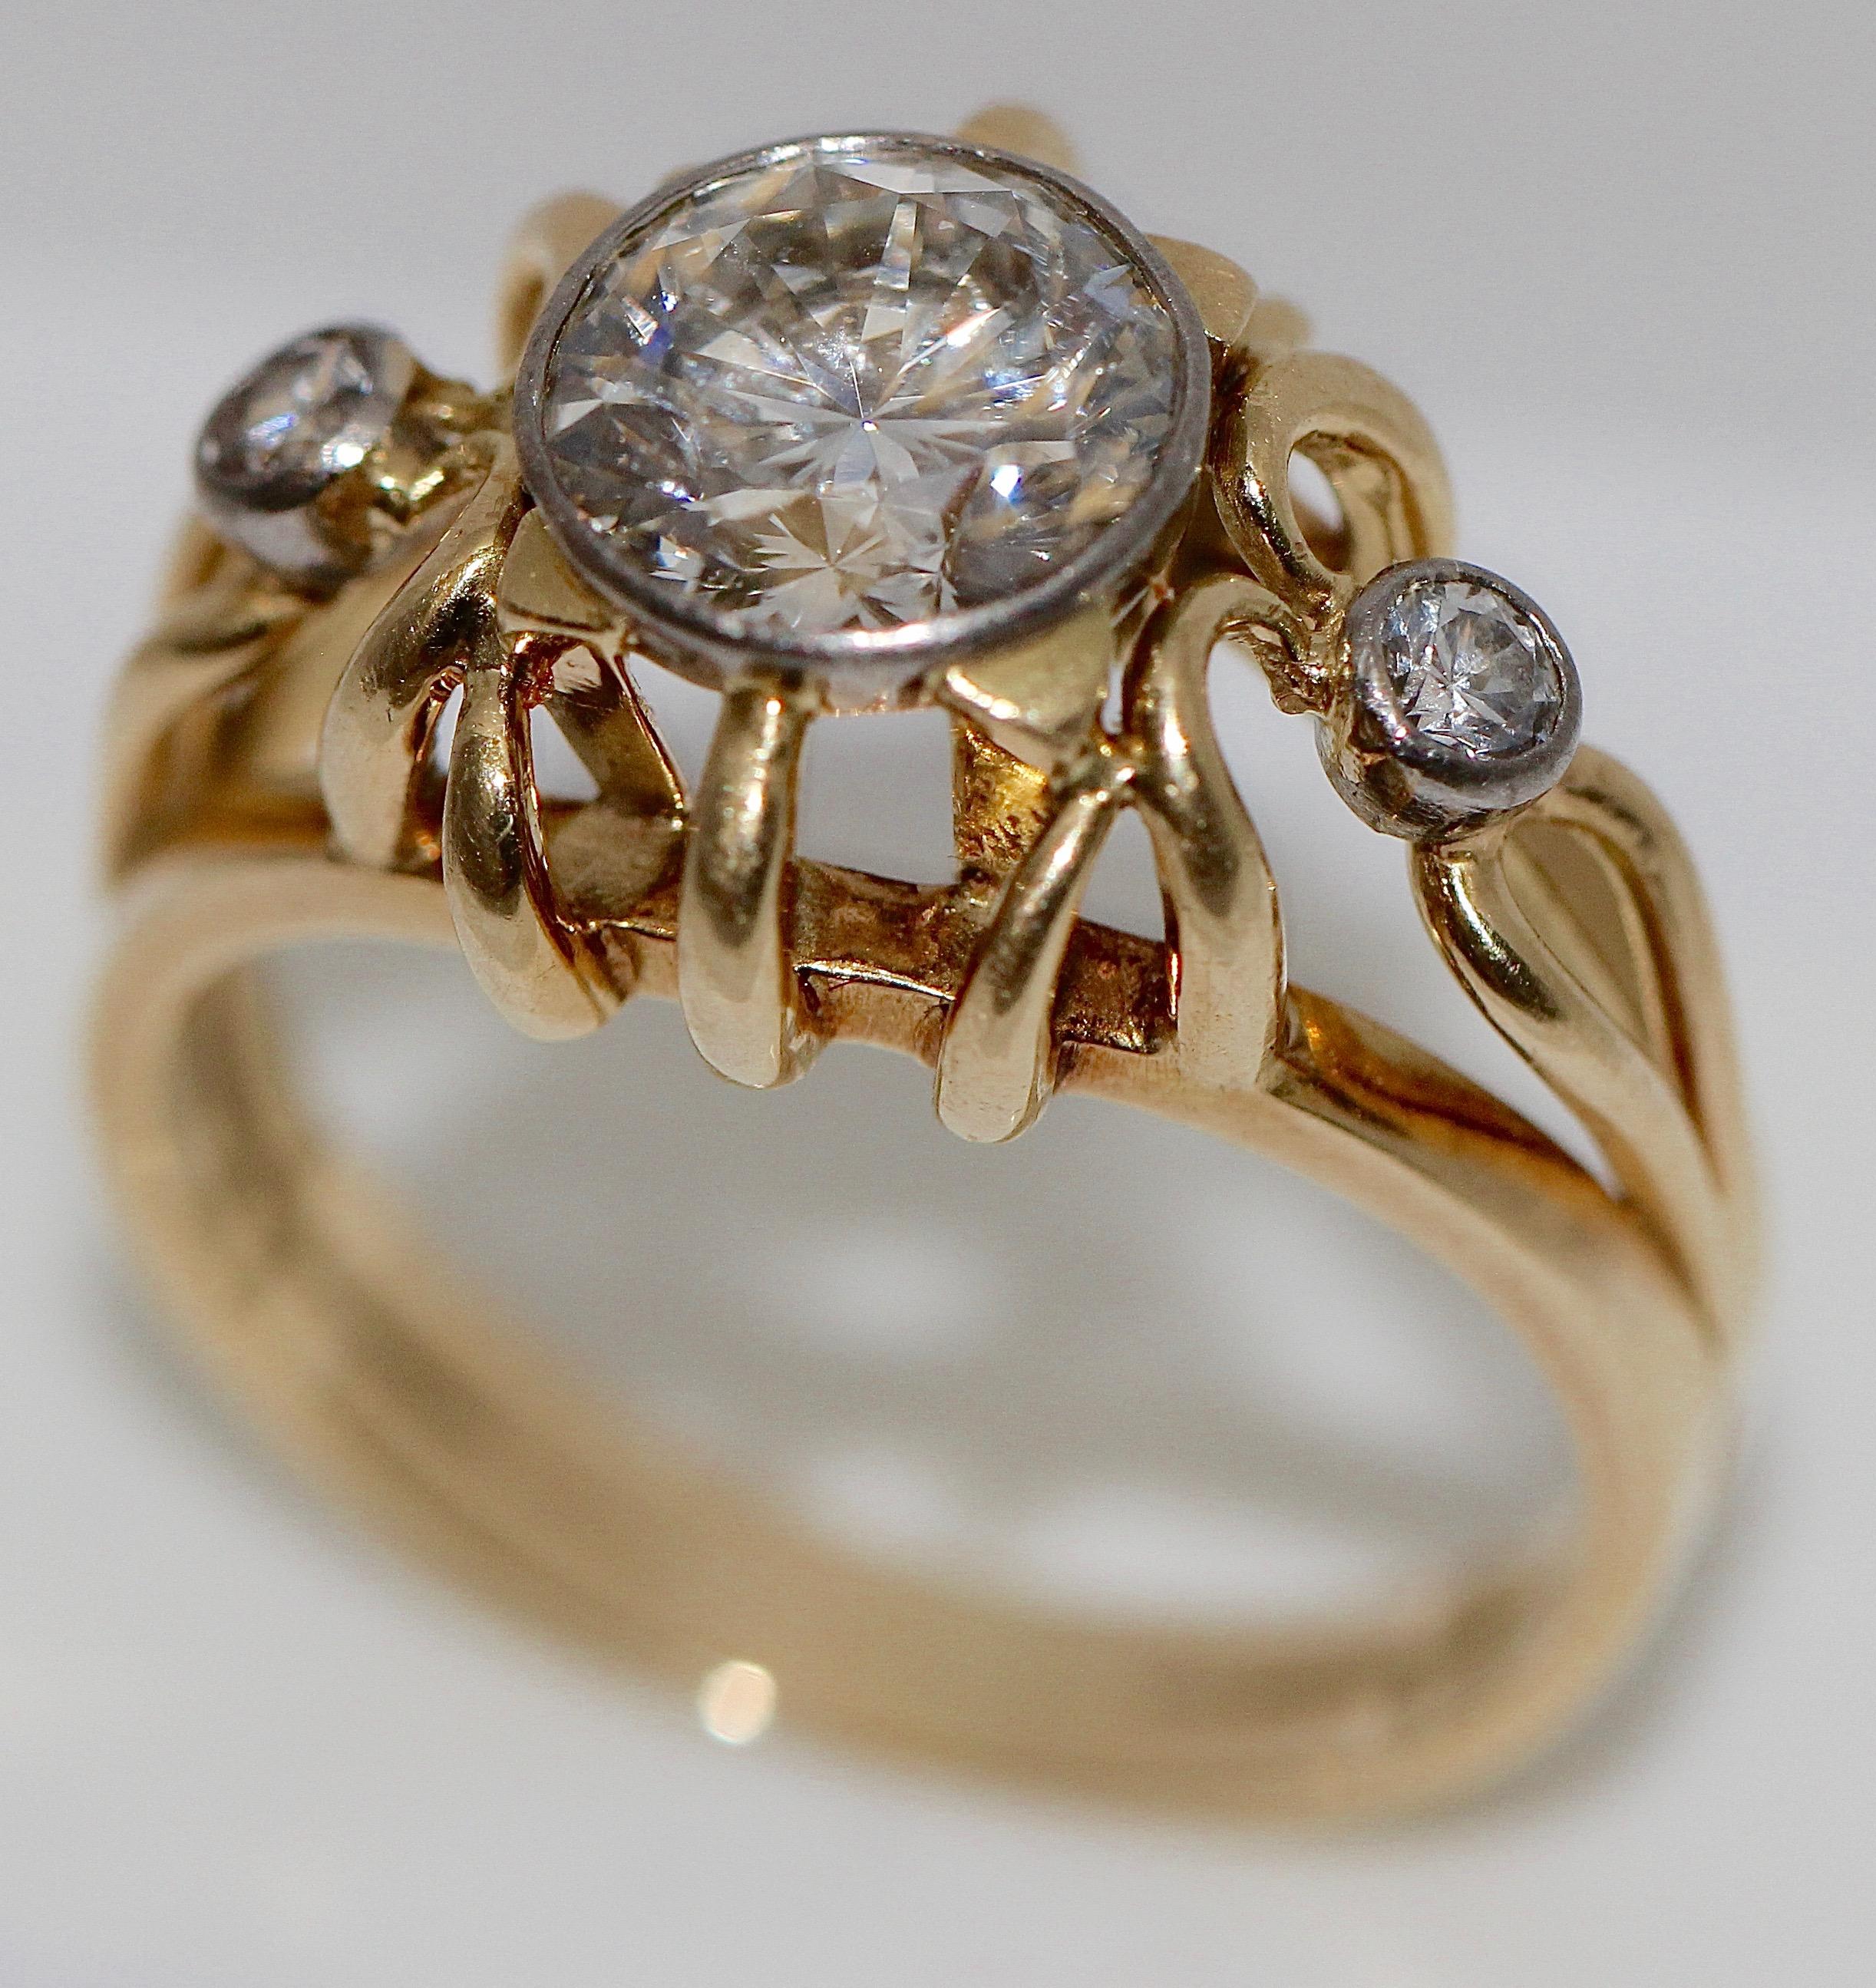 Luxurious diamond ring. 14k yellow gold.

Set with great solitaire of high quality.

Size: At least 1.5 carats
Color: Top Wesselton
Clarity: VS1
Cut: Very good

Additionally set with two small diamonds.